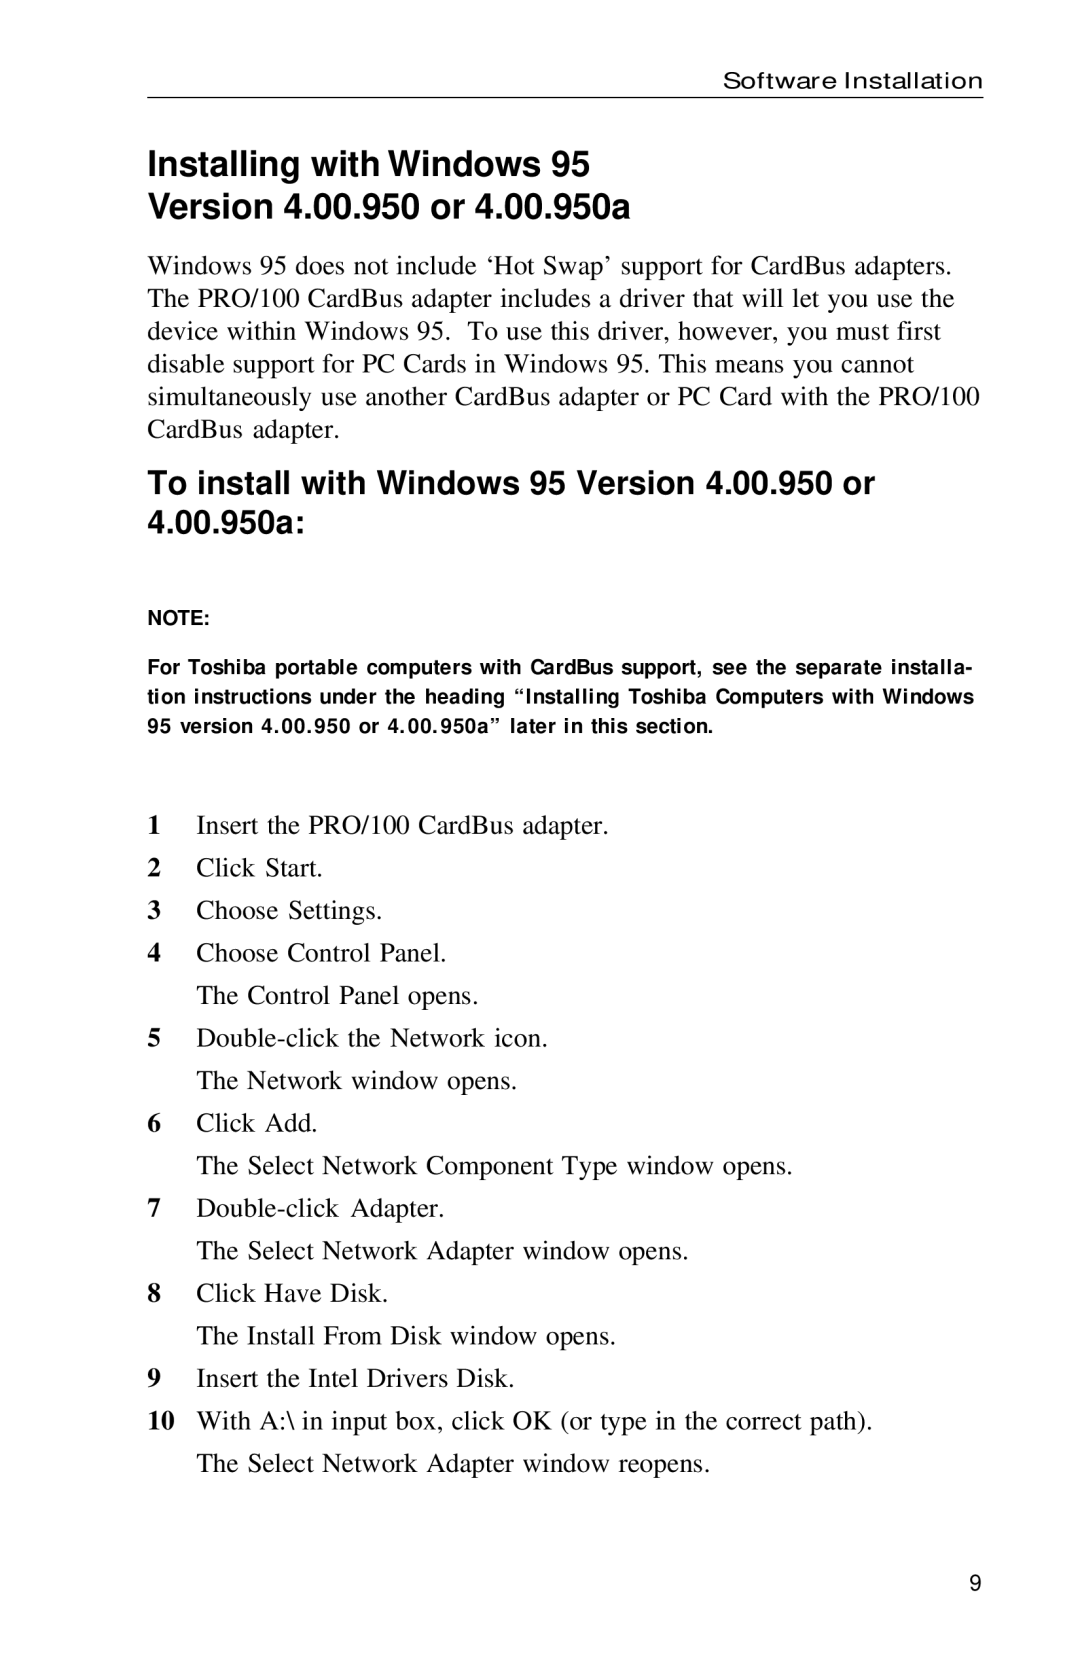 Intel PRO Installing with Windows Version 4.00.950 or 4.00.950a, To install with Windows 95 Version 4.00.950 or 4.00.950a 